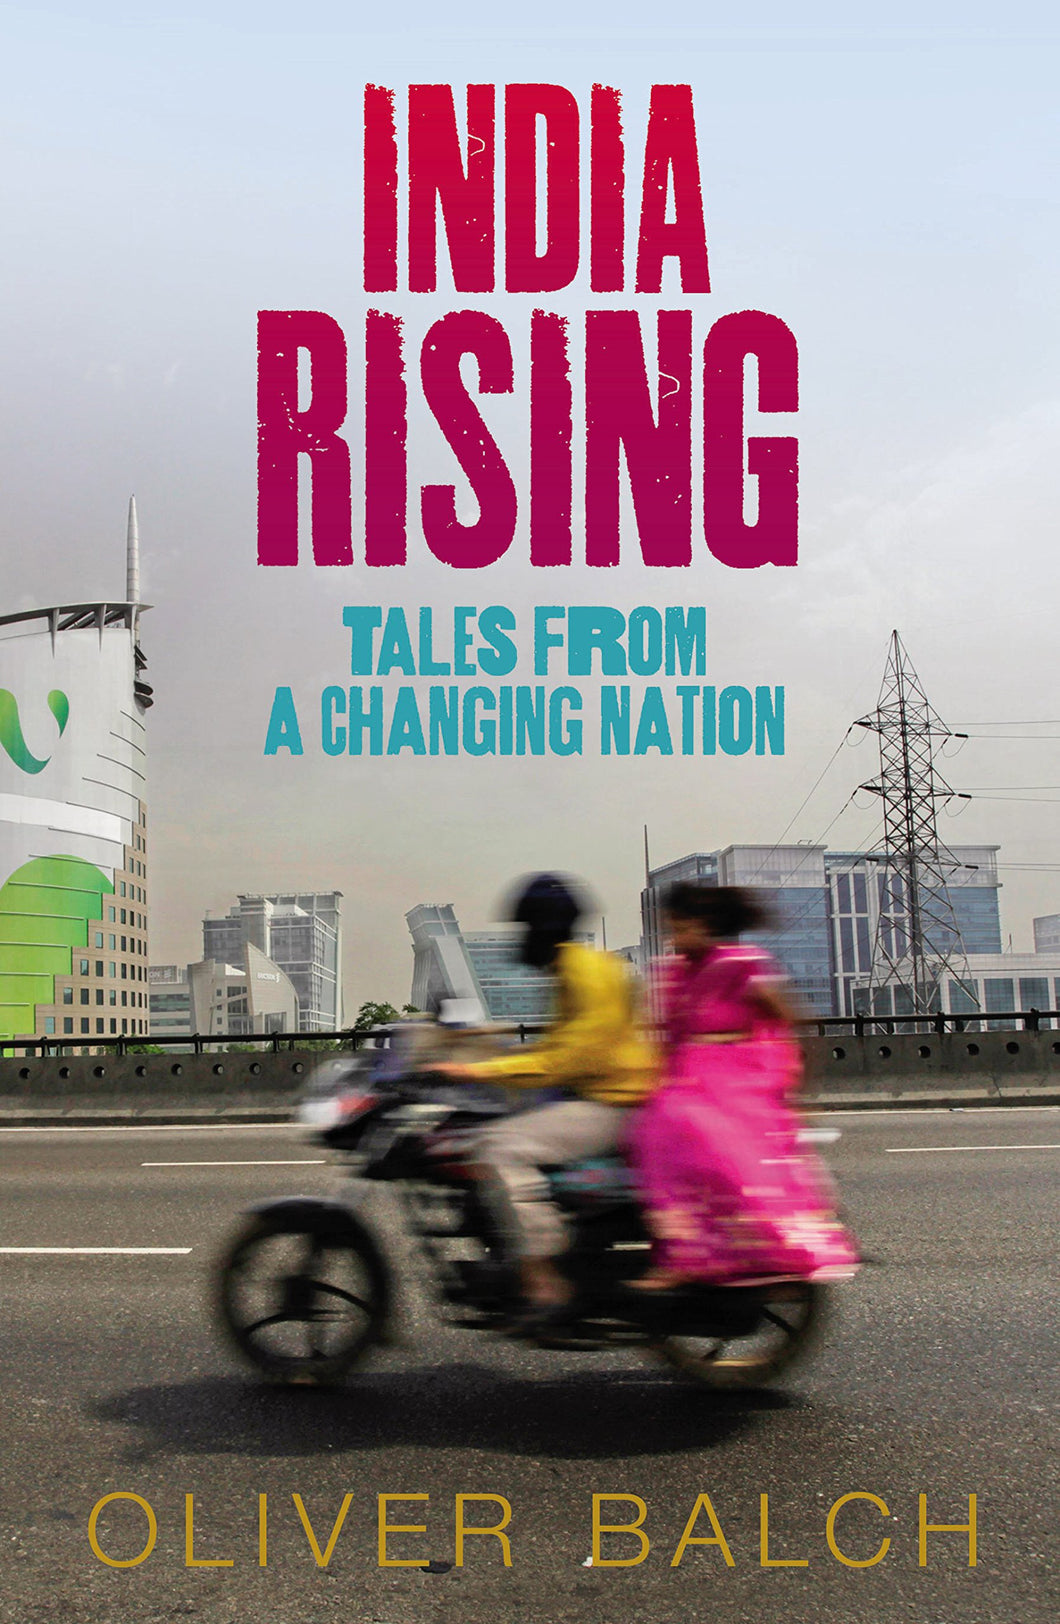 India Rising: Tales from a Changing Nation [Paperback] Balch, Oliver